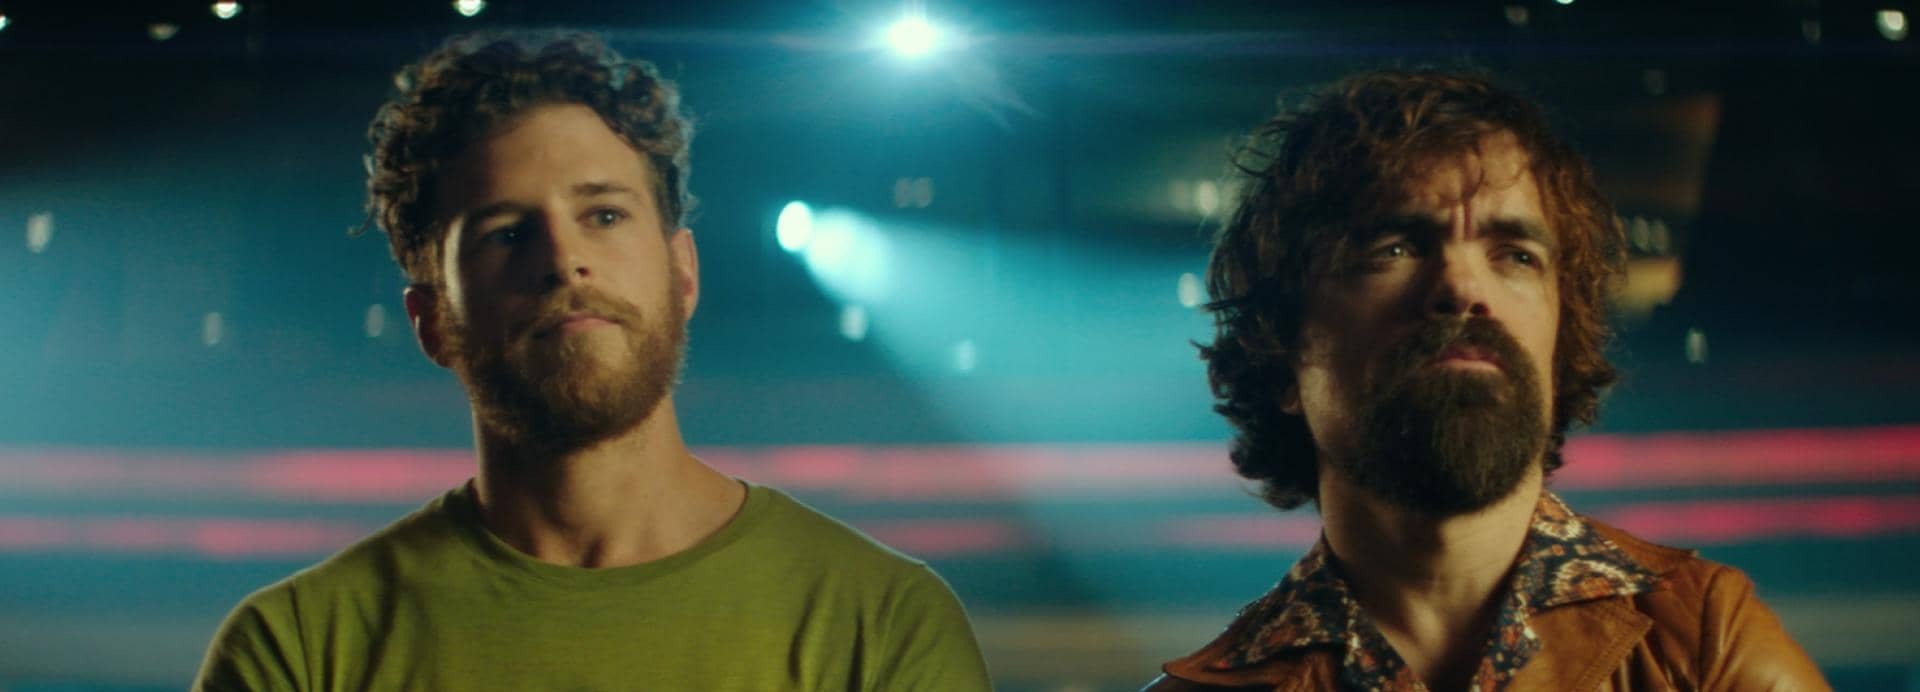 Image of two boys from the advertising spot of Estrella Damm